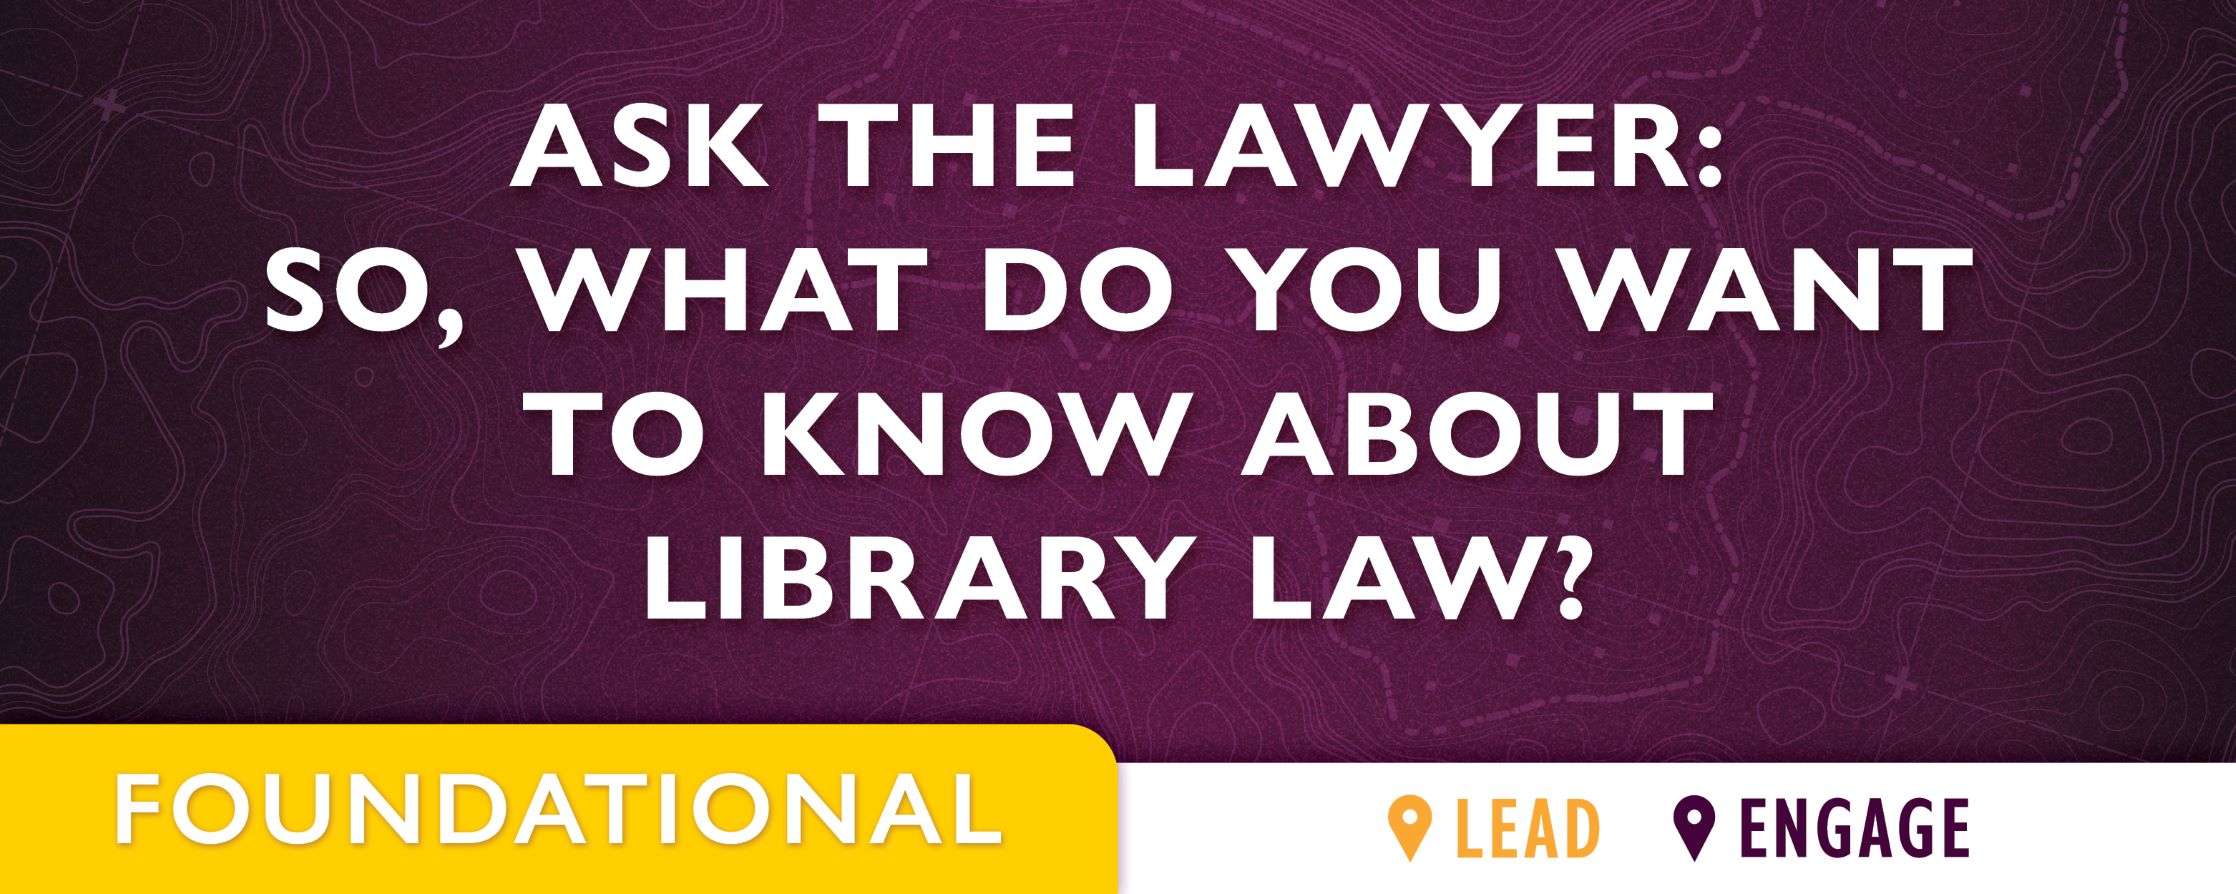 purple background with text: Ask the Lawyer: So, What Do You Want to Know About Library Law?